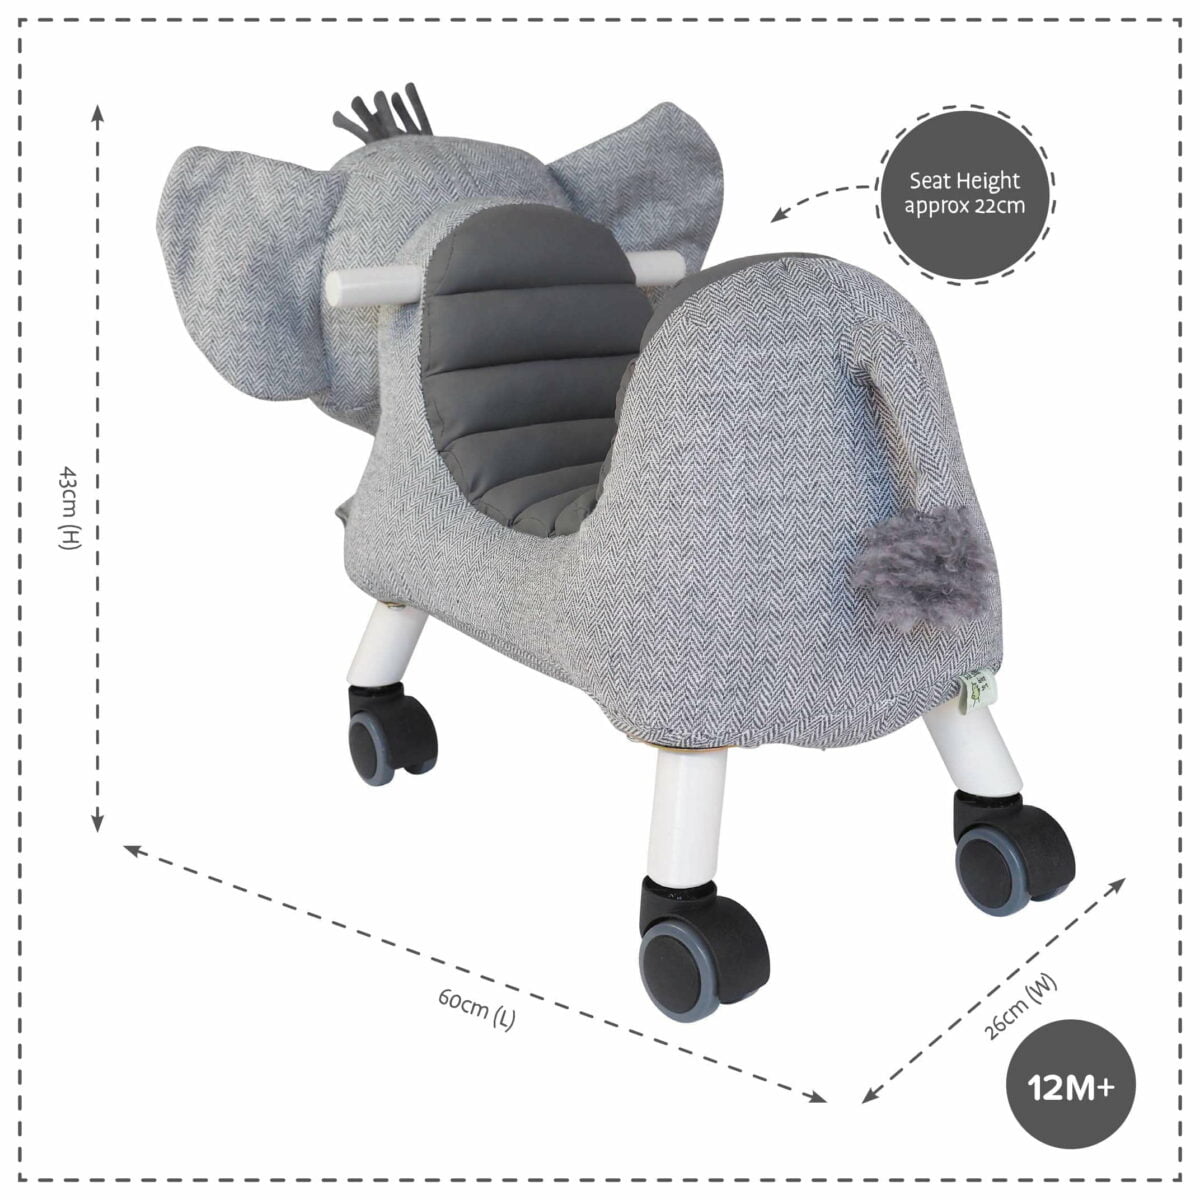 Product dimensions displayed for Cuthbert Elephant Ride On Toy